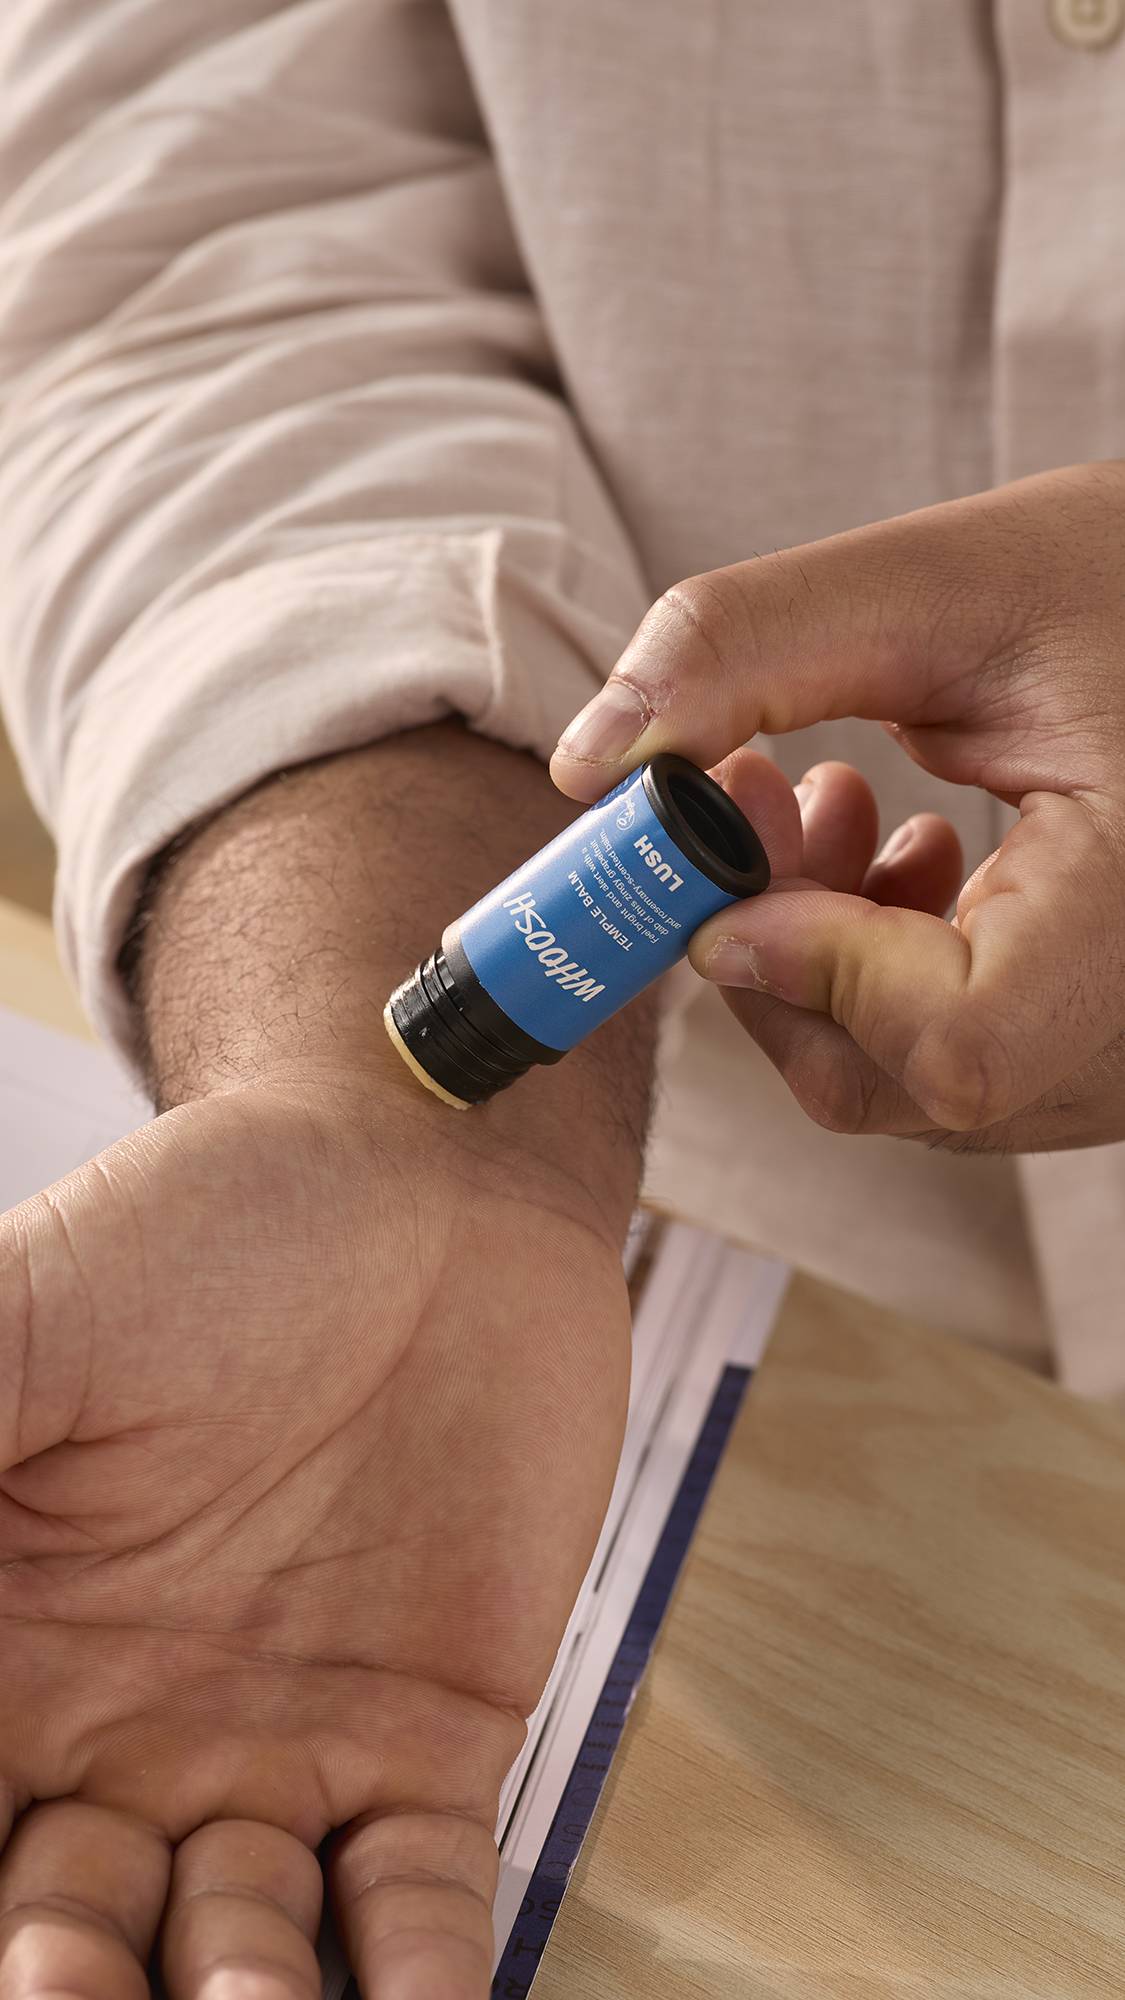 The image shows a close-up of the model's forearms and hands as they gently swipe the balm stick across their wrist. 